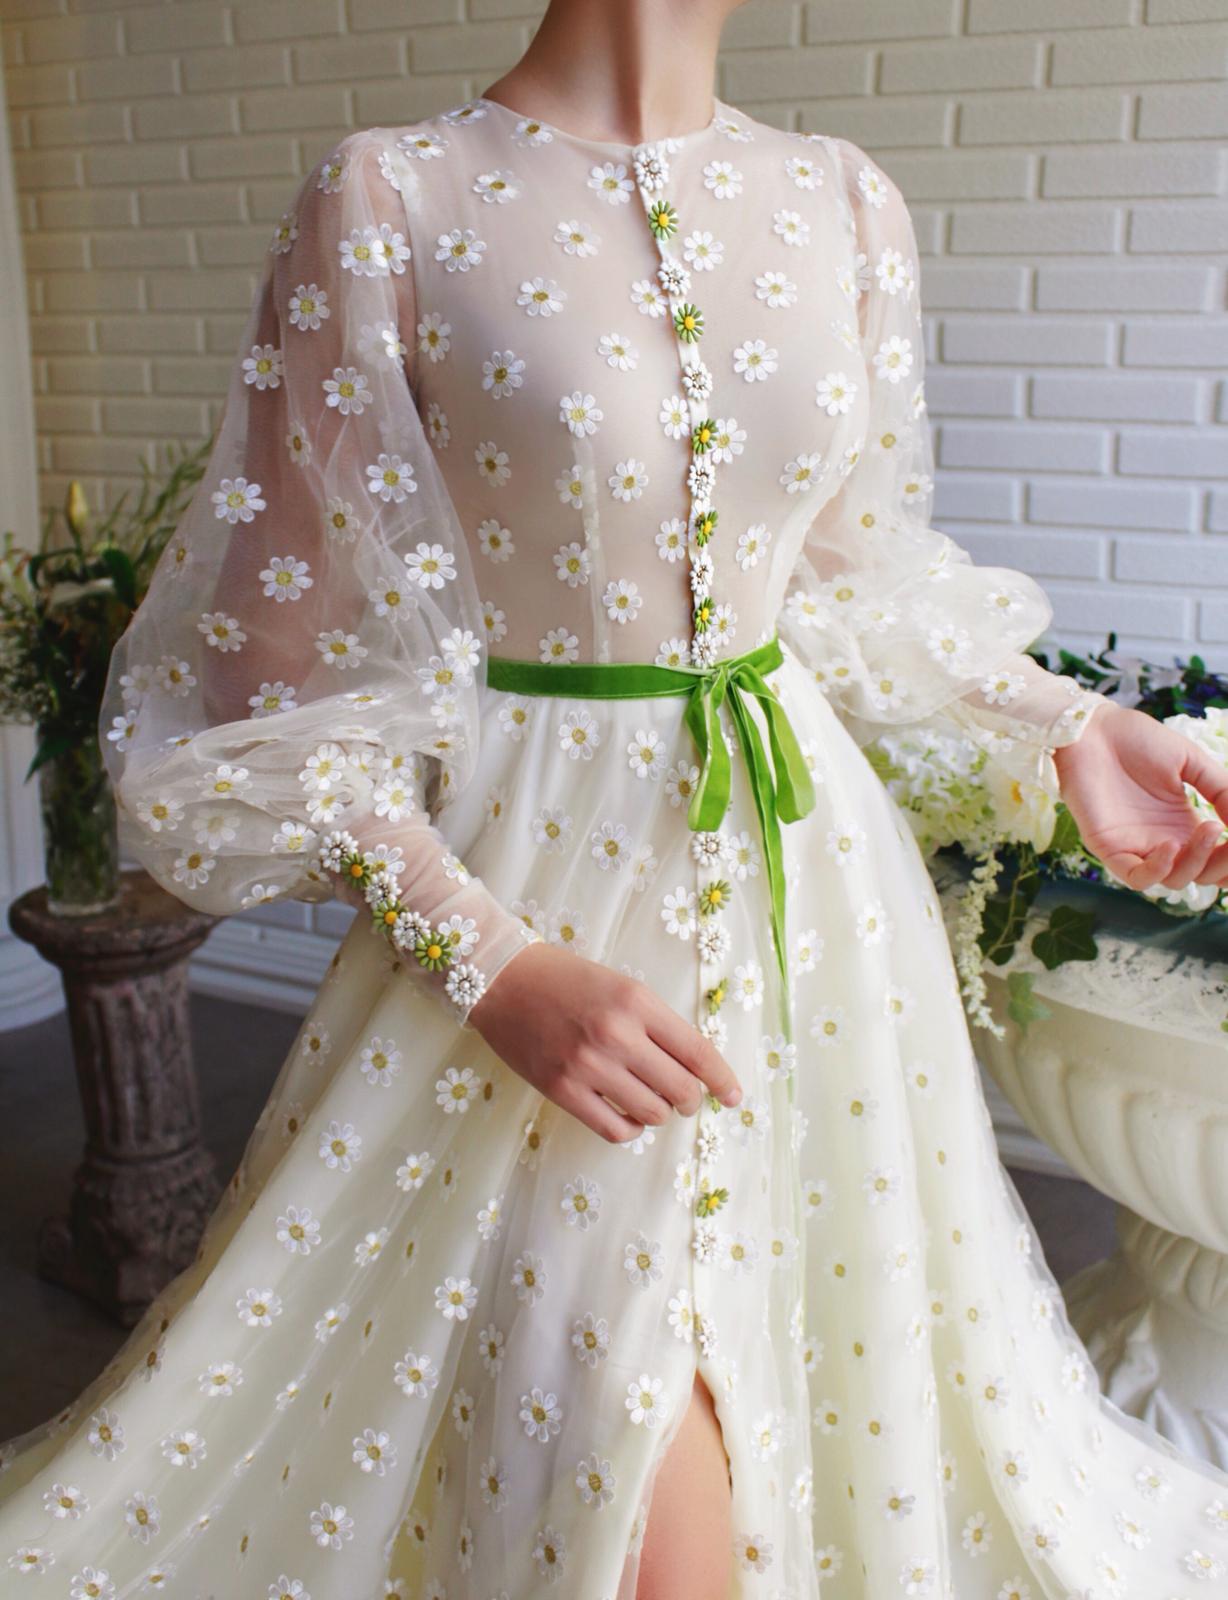 Beige A-Line dress with daisies and long sleeves